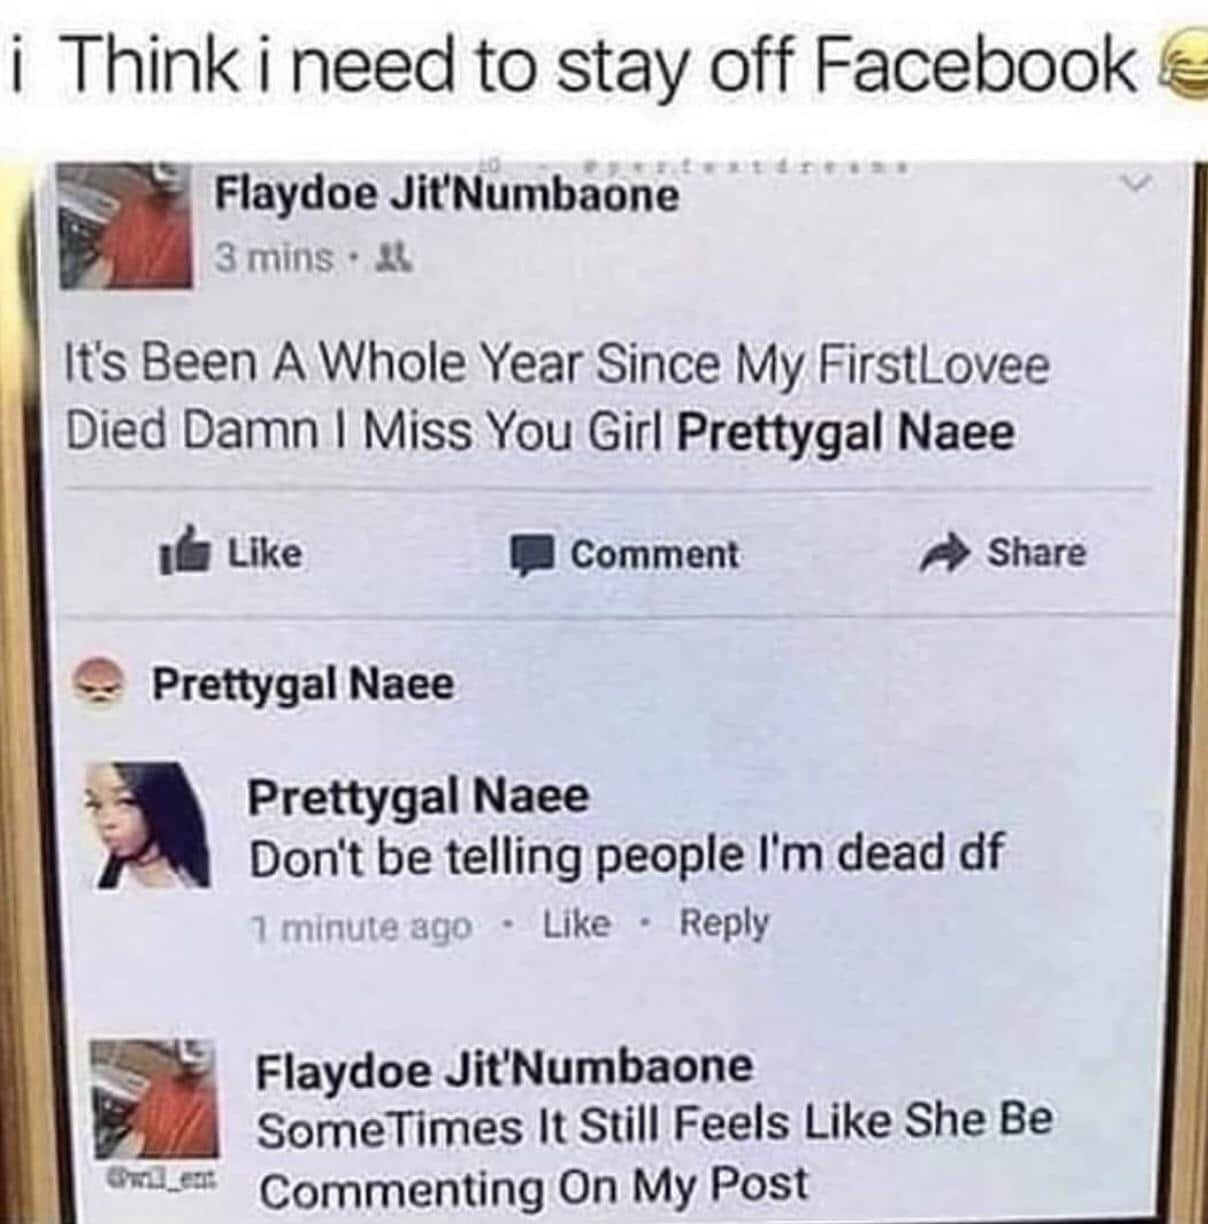 Cringe, Instagram cringe memes Cringe, Instagram text: i Think i need to stay off Facebook Flaydoe Ji!Numbaone 3 mins • It's Been A Whole Year Since My FirstLovee Died Damn I Miss You Girl Prettygal Naee Like Prettygal Naee Comment Share Prettygal Naee Dont be telling people I'm dead df Like • Reply minute ago Flaydoe Jit'Numbaone SomeTimes It Still Feels Like She Be Commenting On My Post 